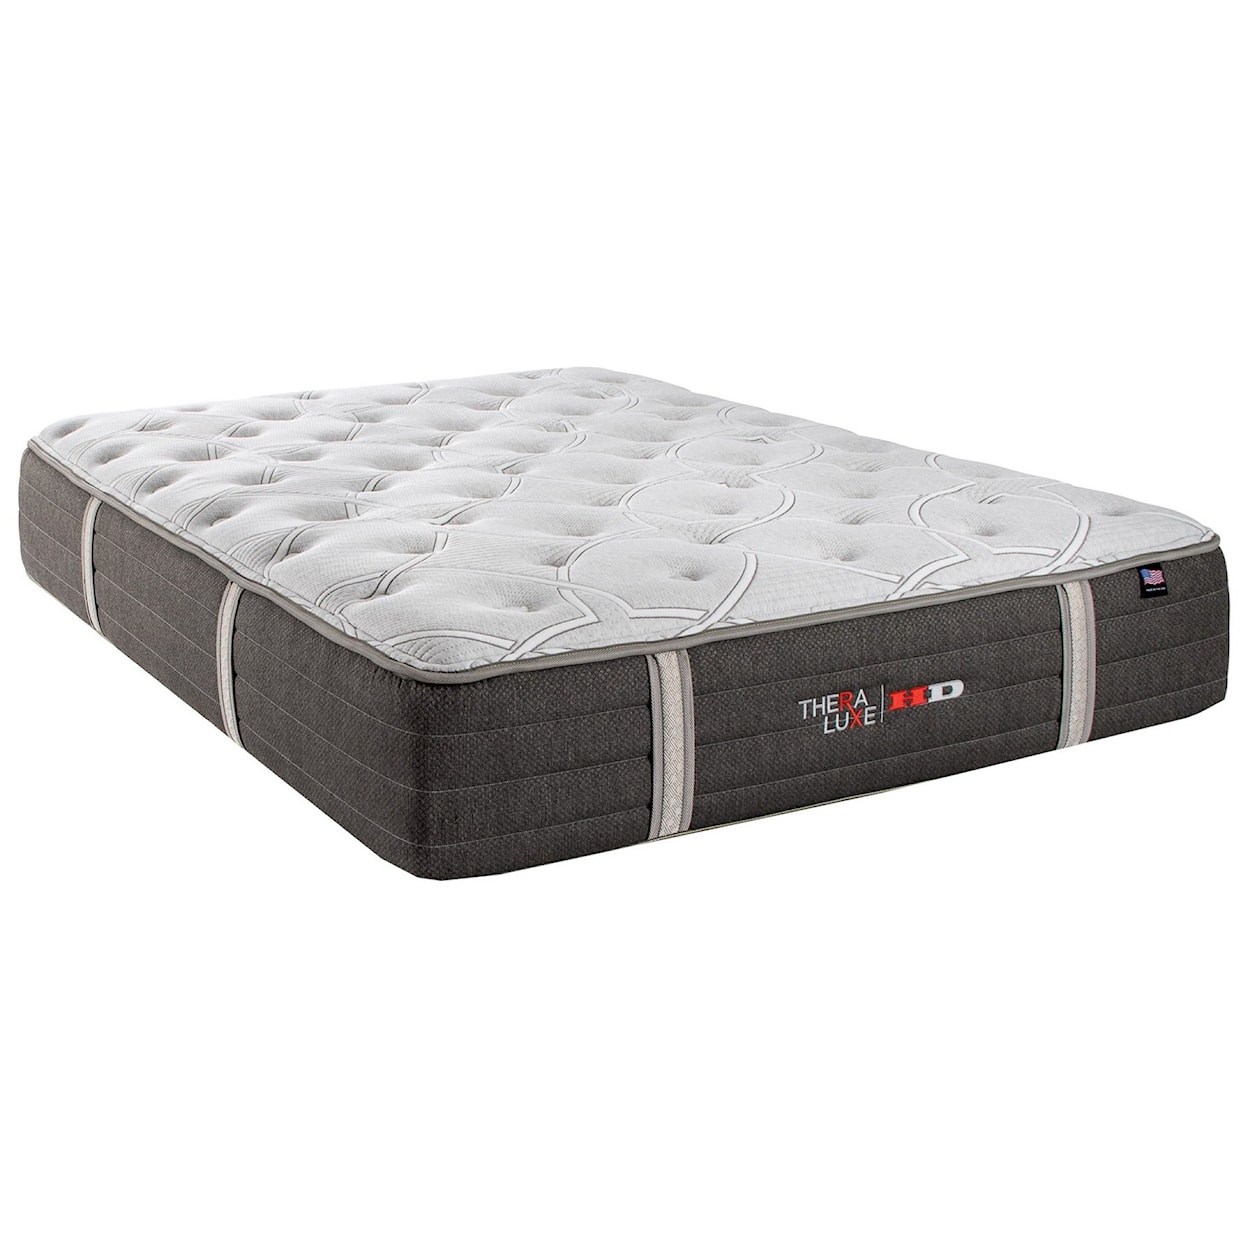 Therapedic Theraluxe Sequoia Cal King Plush Pocketed Coil Mattress